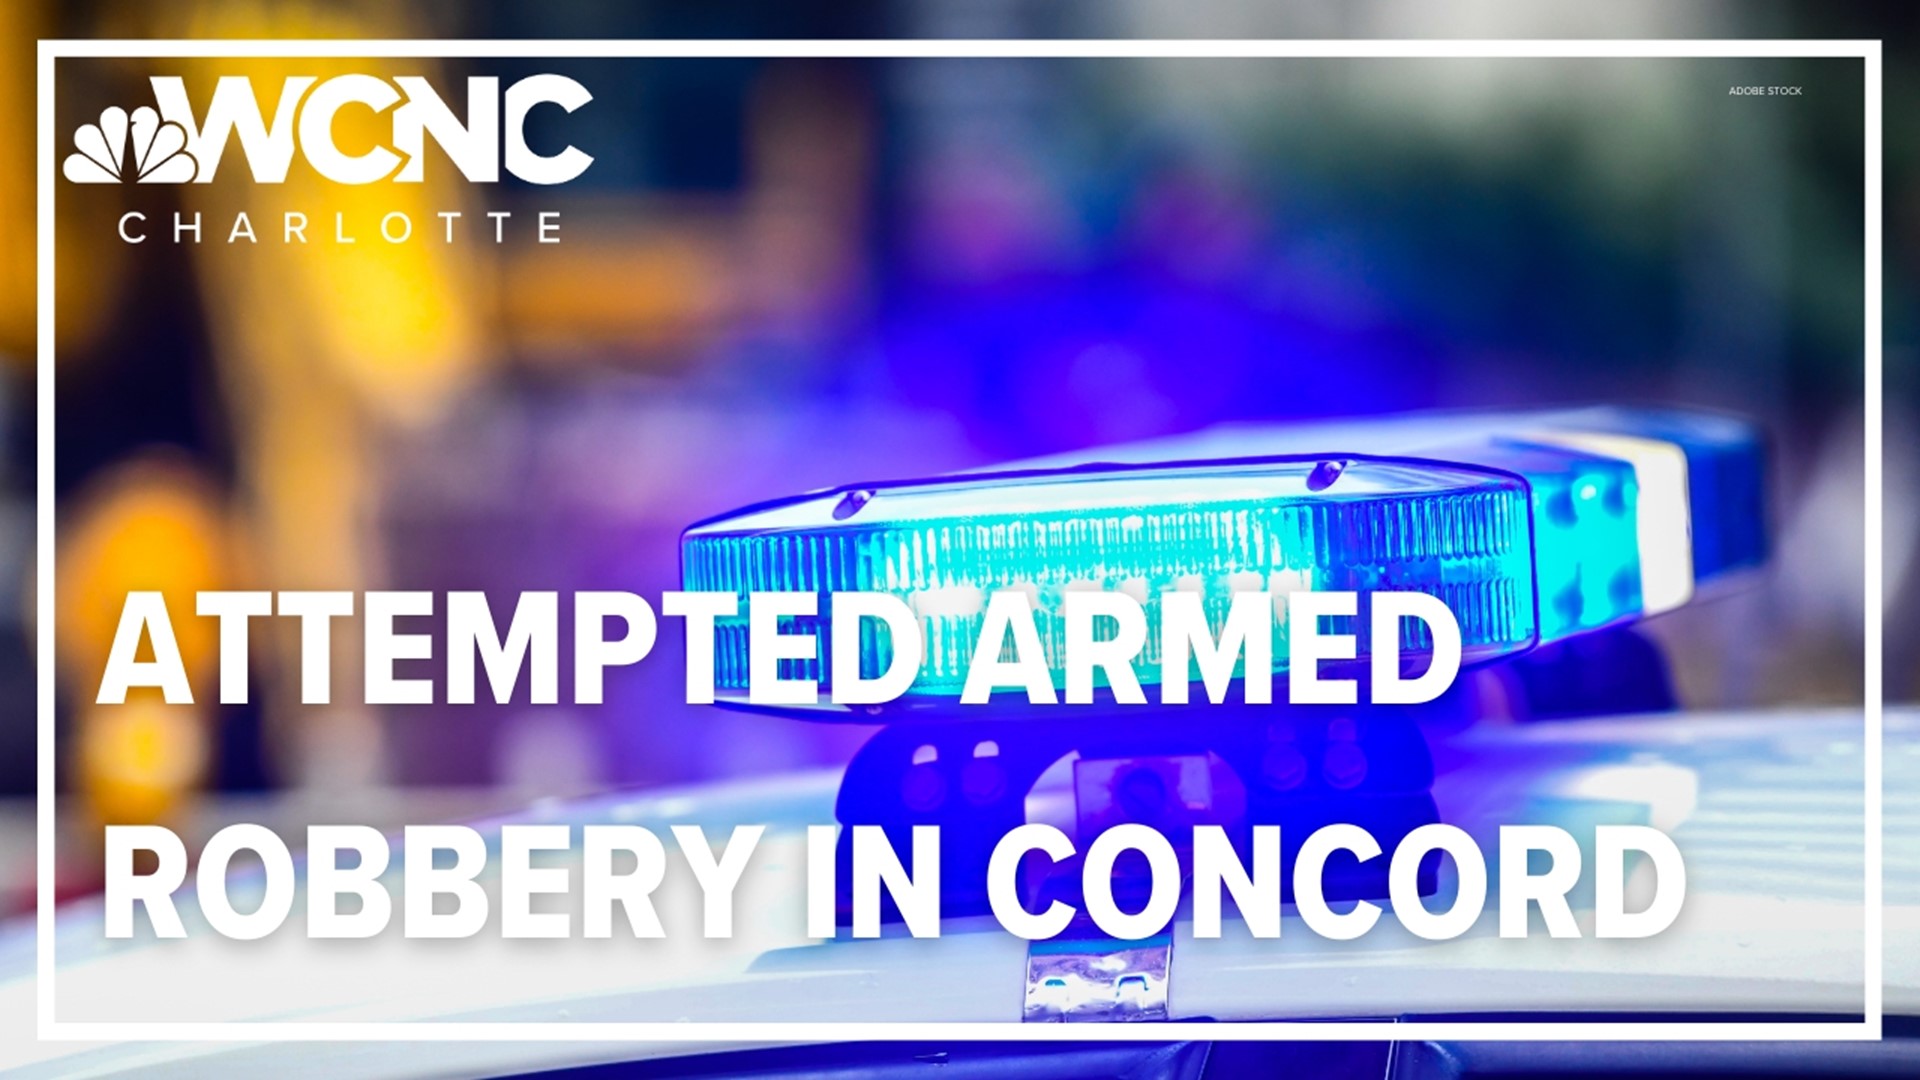 The suspect was charged with attempted armed robbery, possession of a firearm by a felon, and shooting into an occupied property, police said.